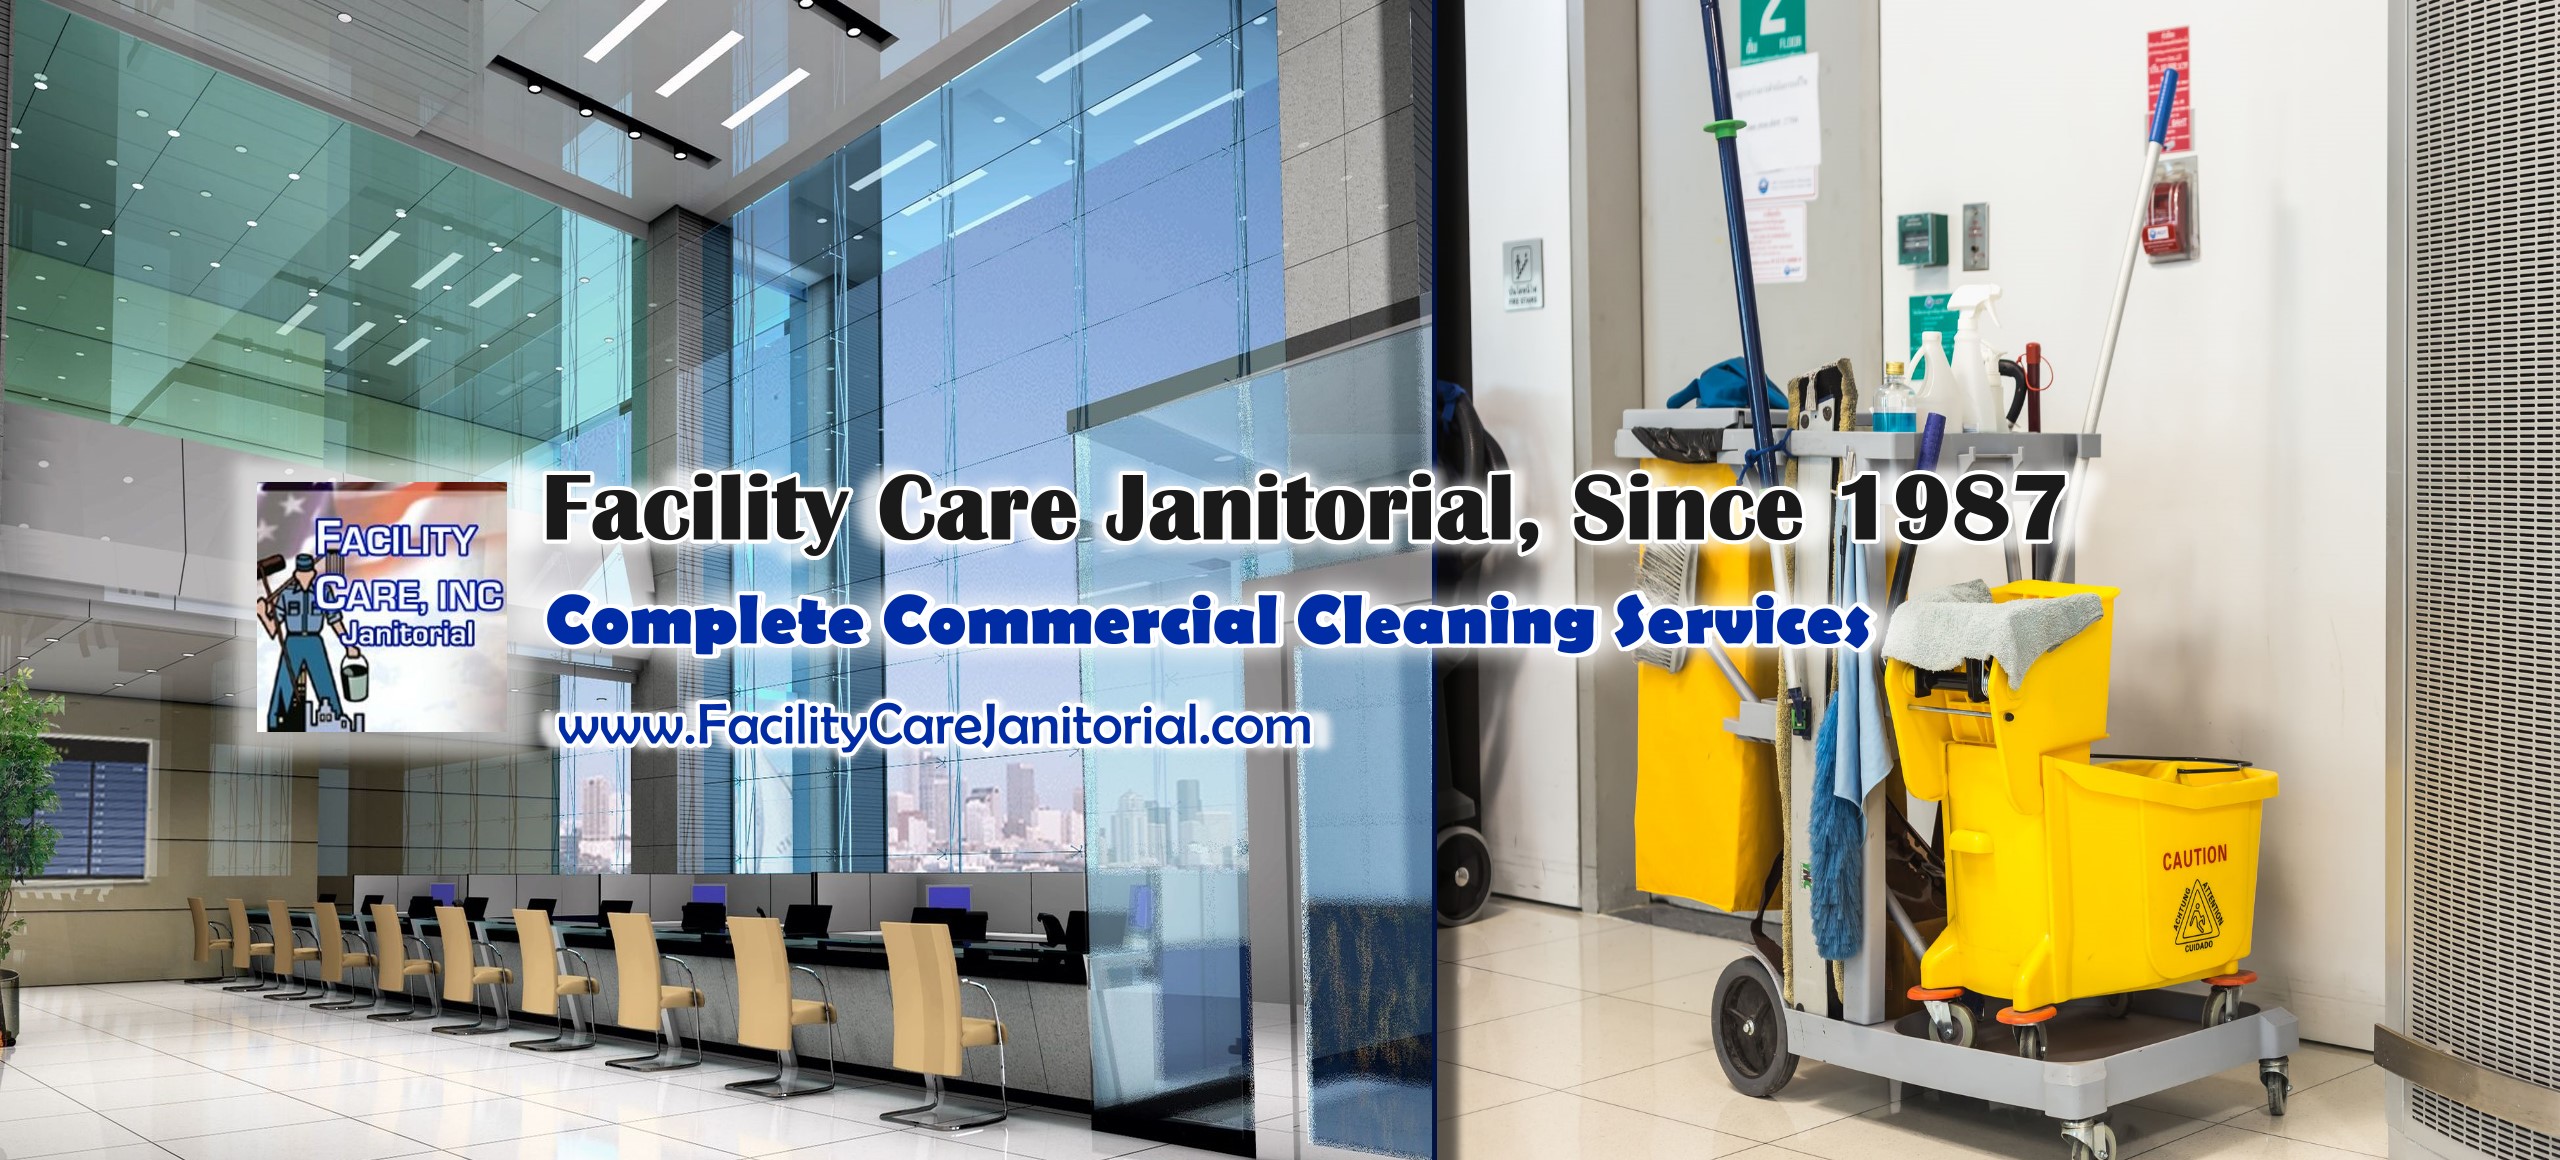 Facility Care Janitorial Services Photo